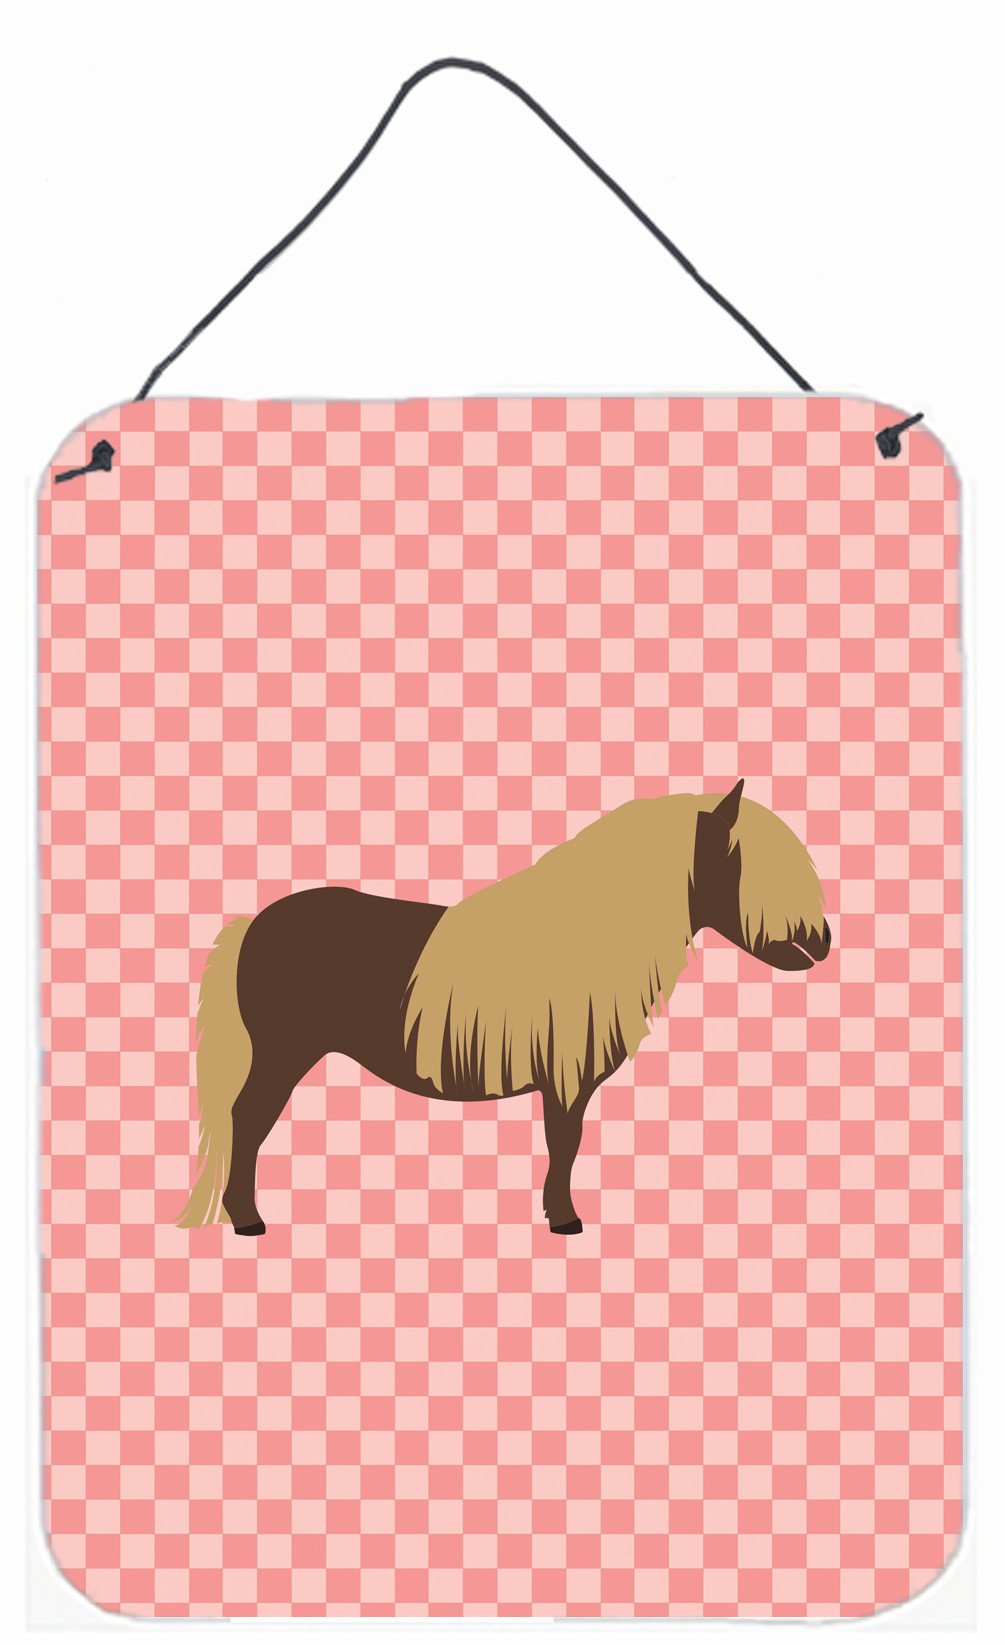 Shetland Pony Horse Pink Check Wall or Door Hanging Prints BB7914DS1216 by Caroline's Treasures